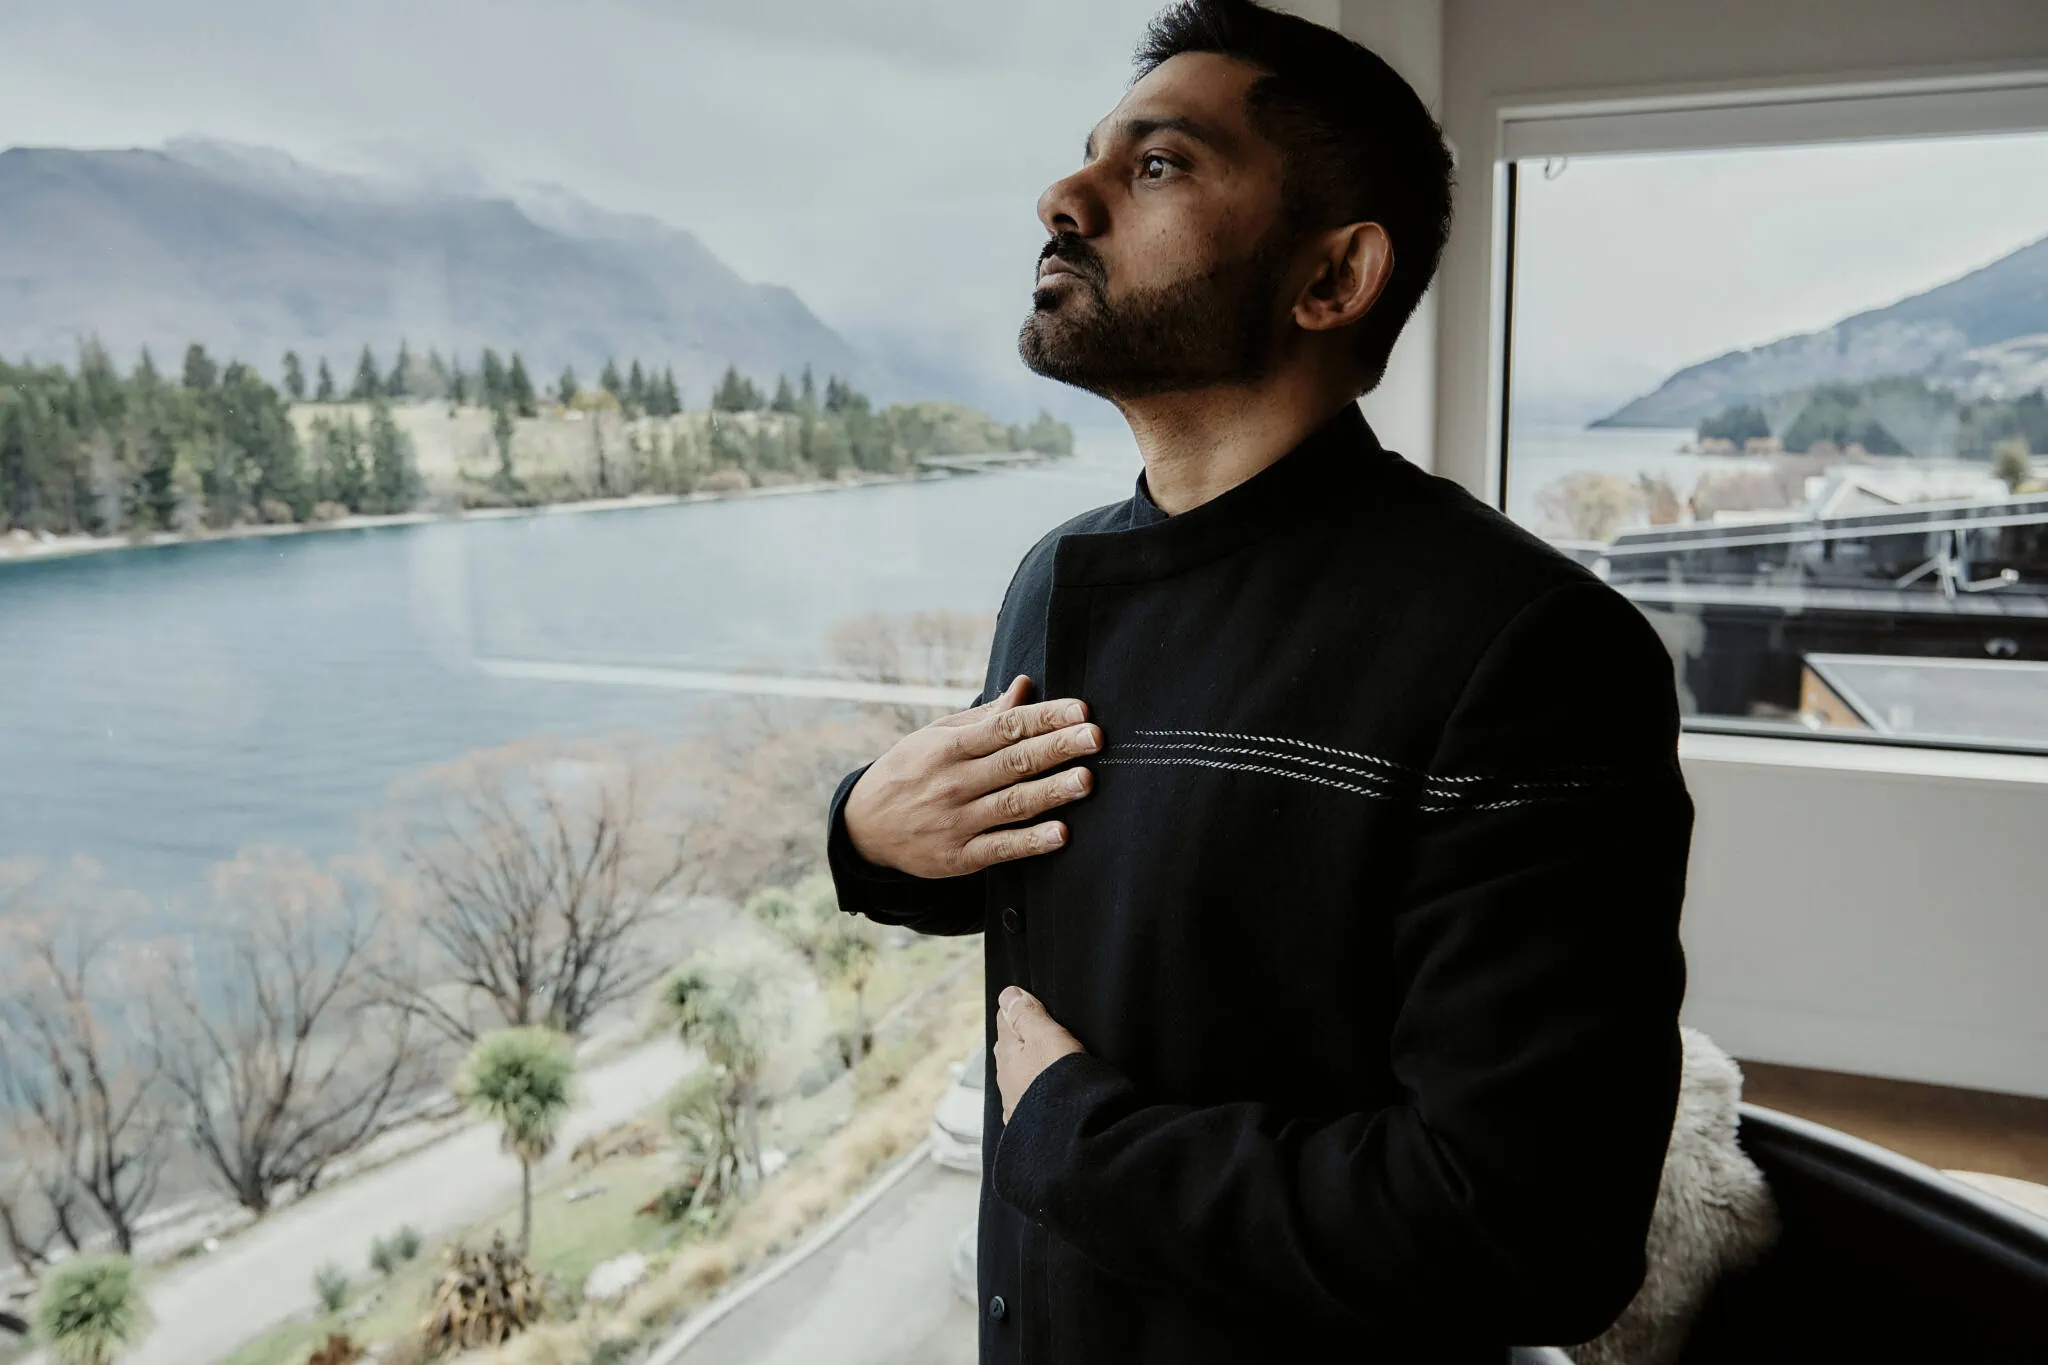 Queenstown New Zealand Elopement Wedding Photographer - A man, Wasim, standing in front of a window with a view of a lake at his Queenstown Islamic wedding.